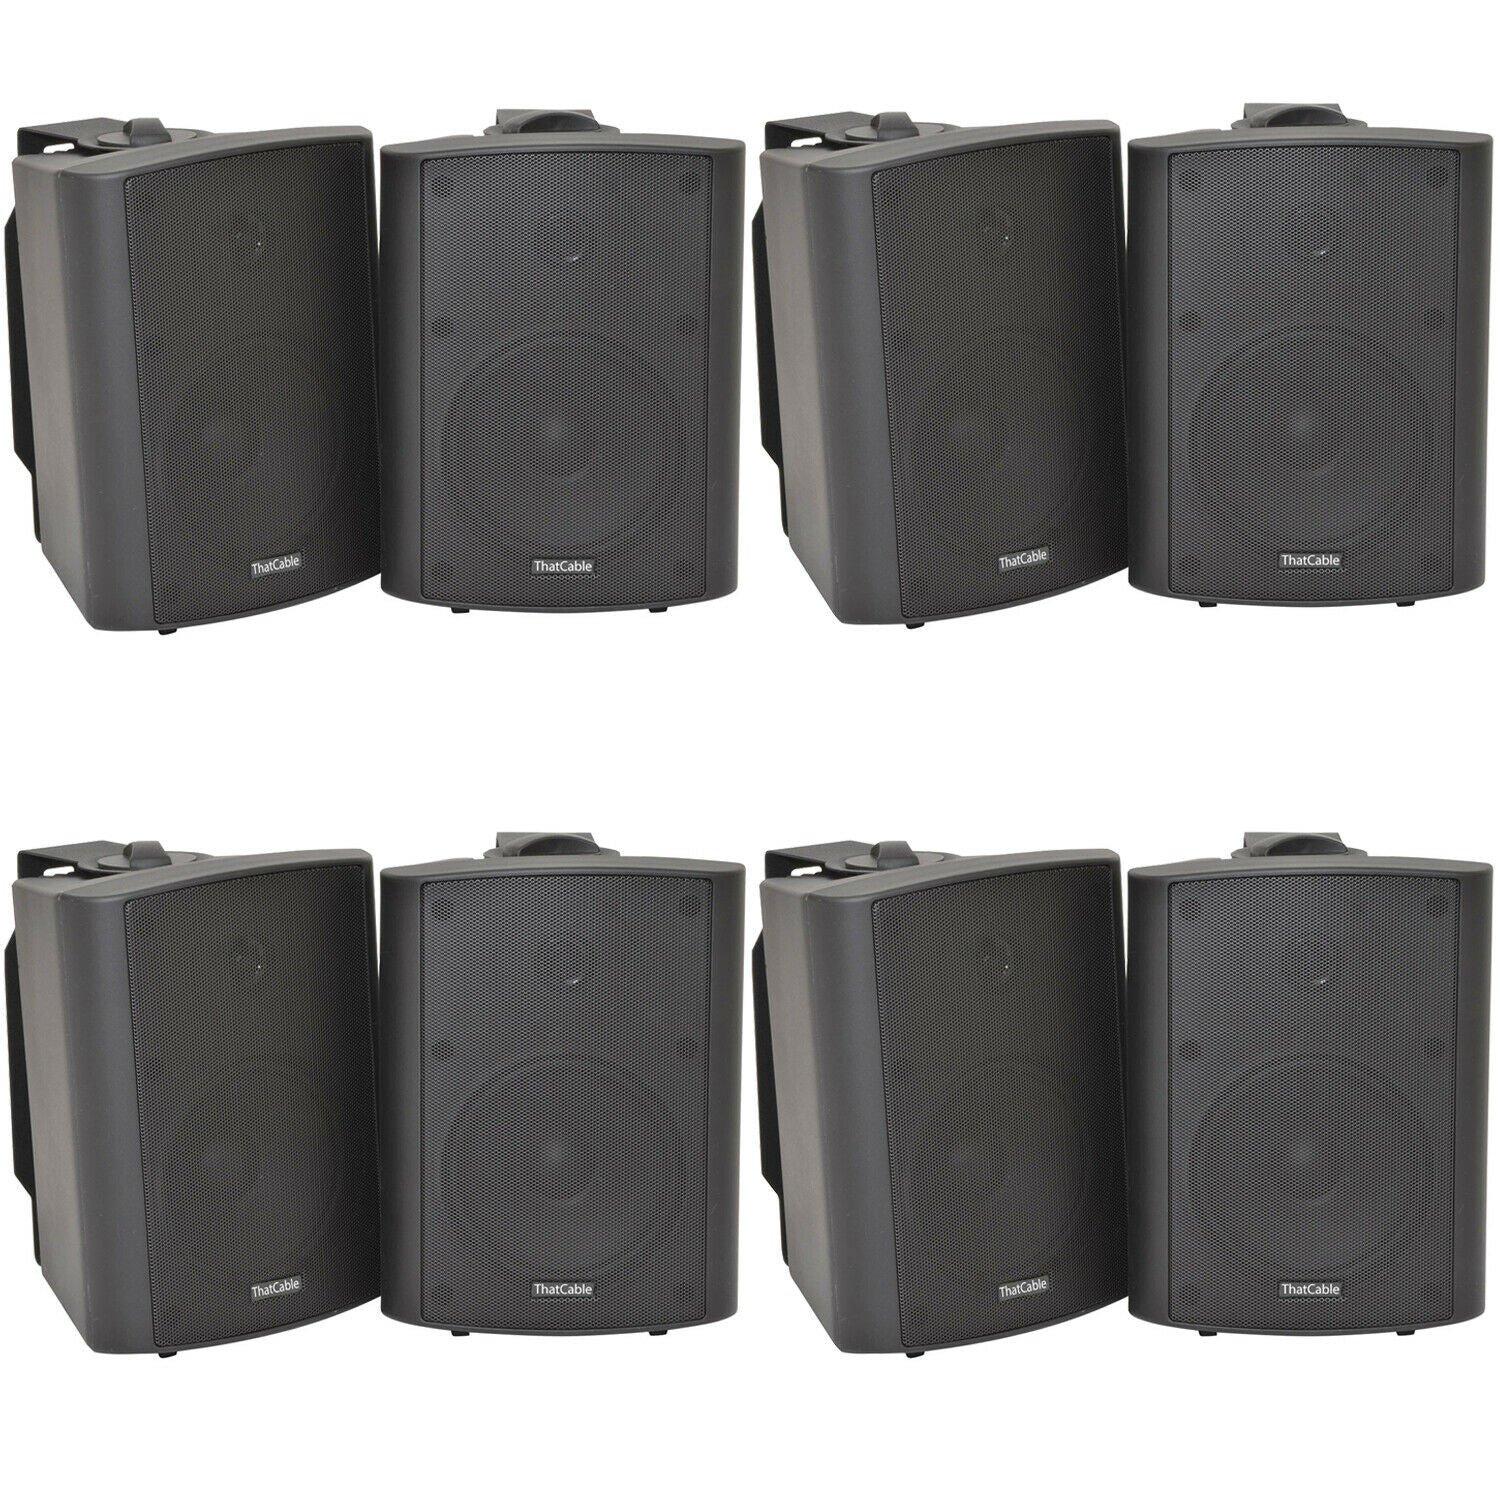 8x 120W Black Wall Mounted Stereo Speakers 6.5